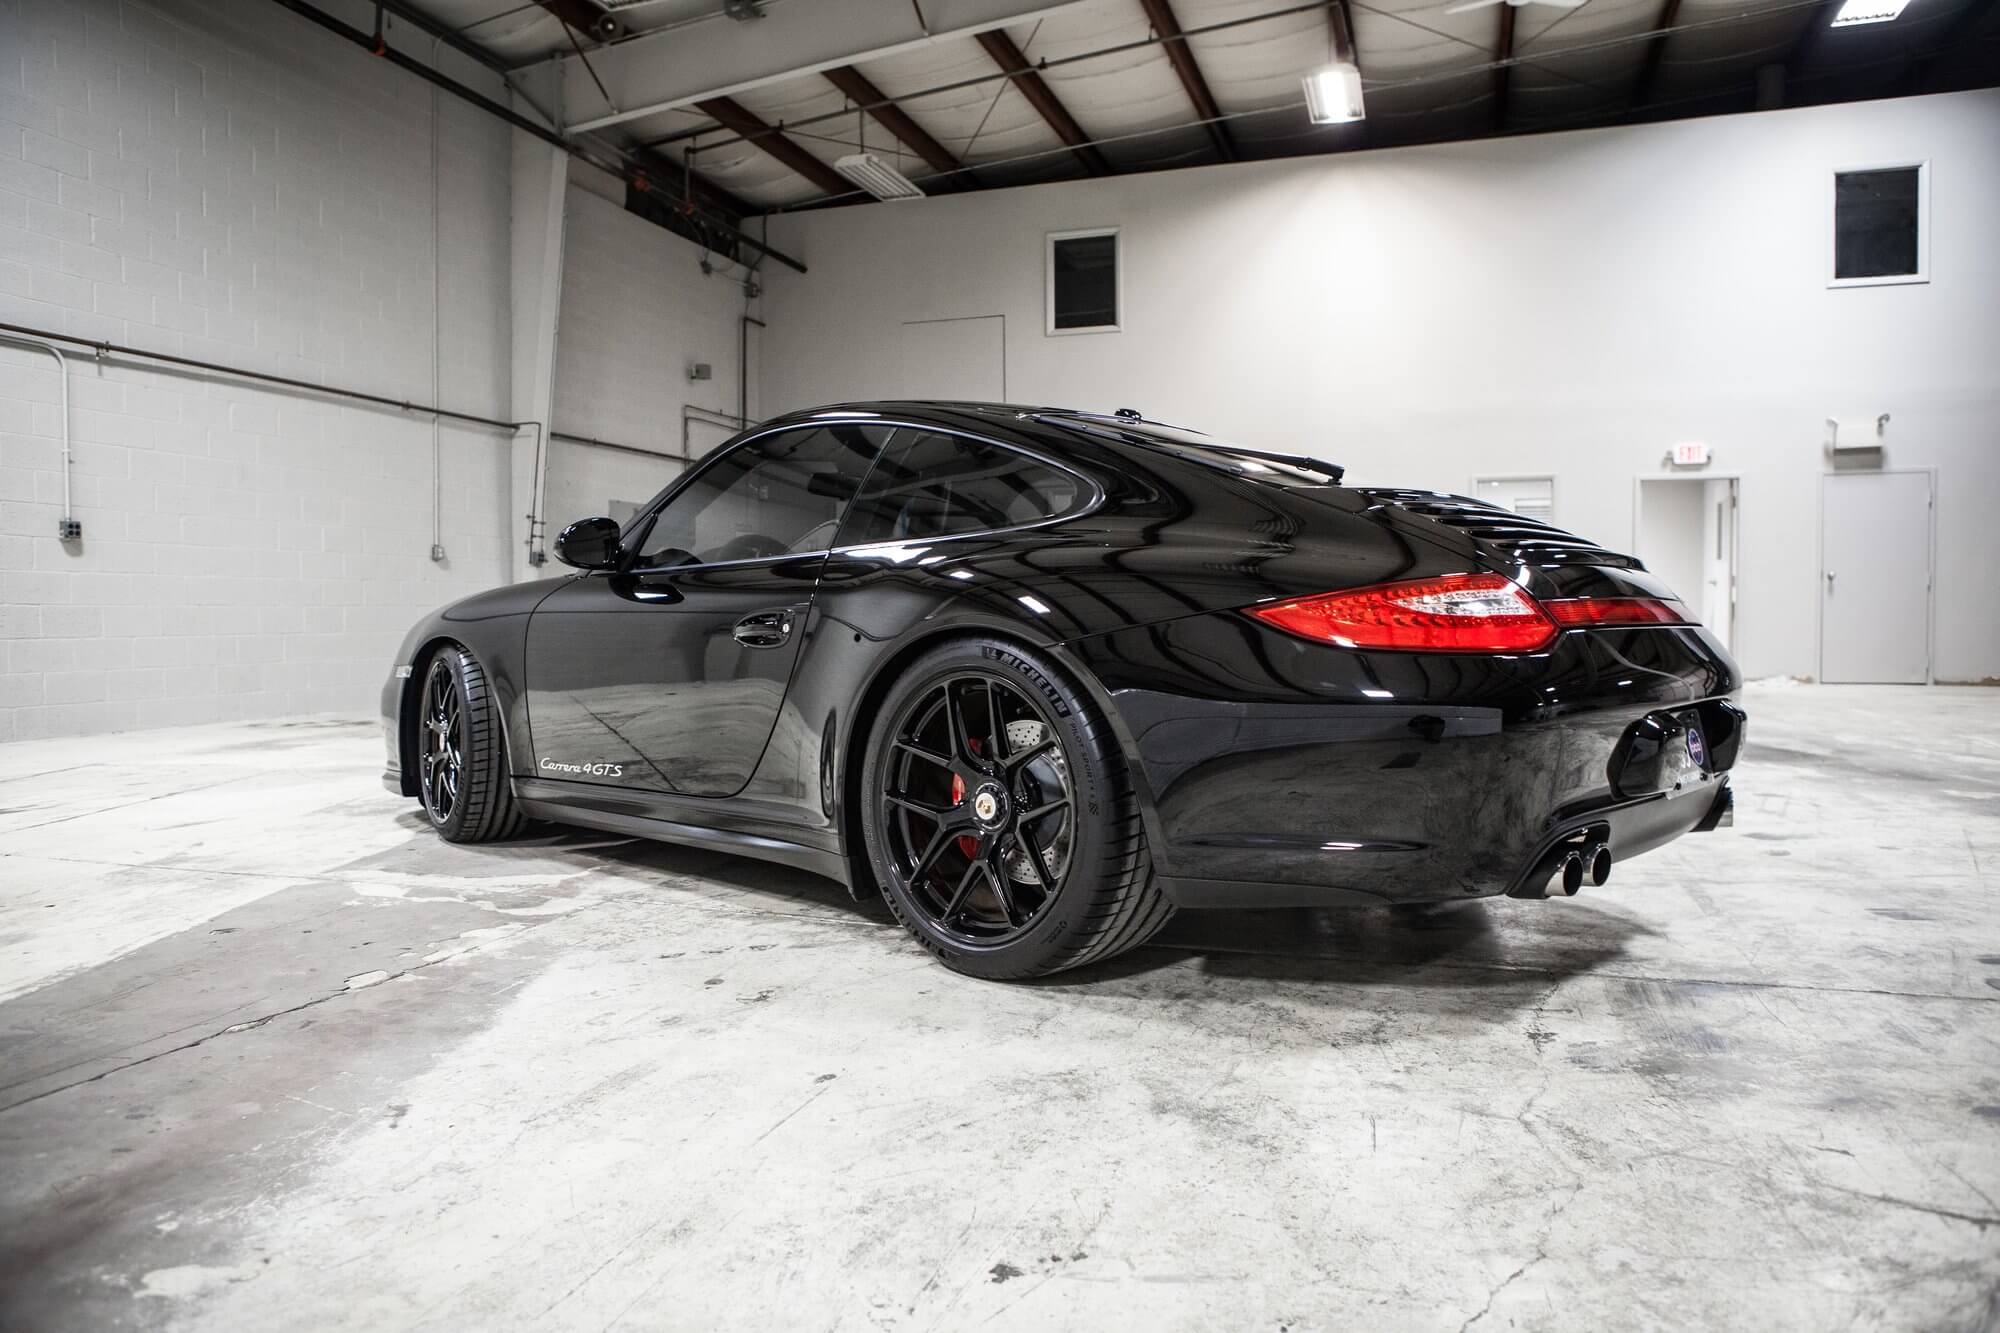 HRE Wheels for Porsche 911 | 997 | Upgrade Your 911 with HRE Wheels